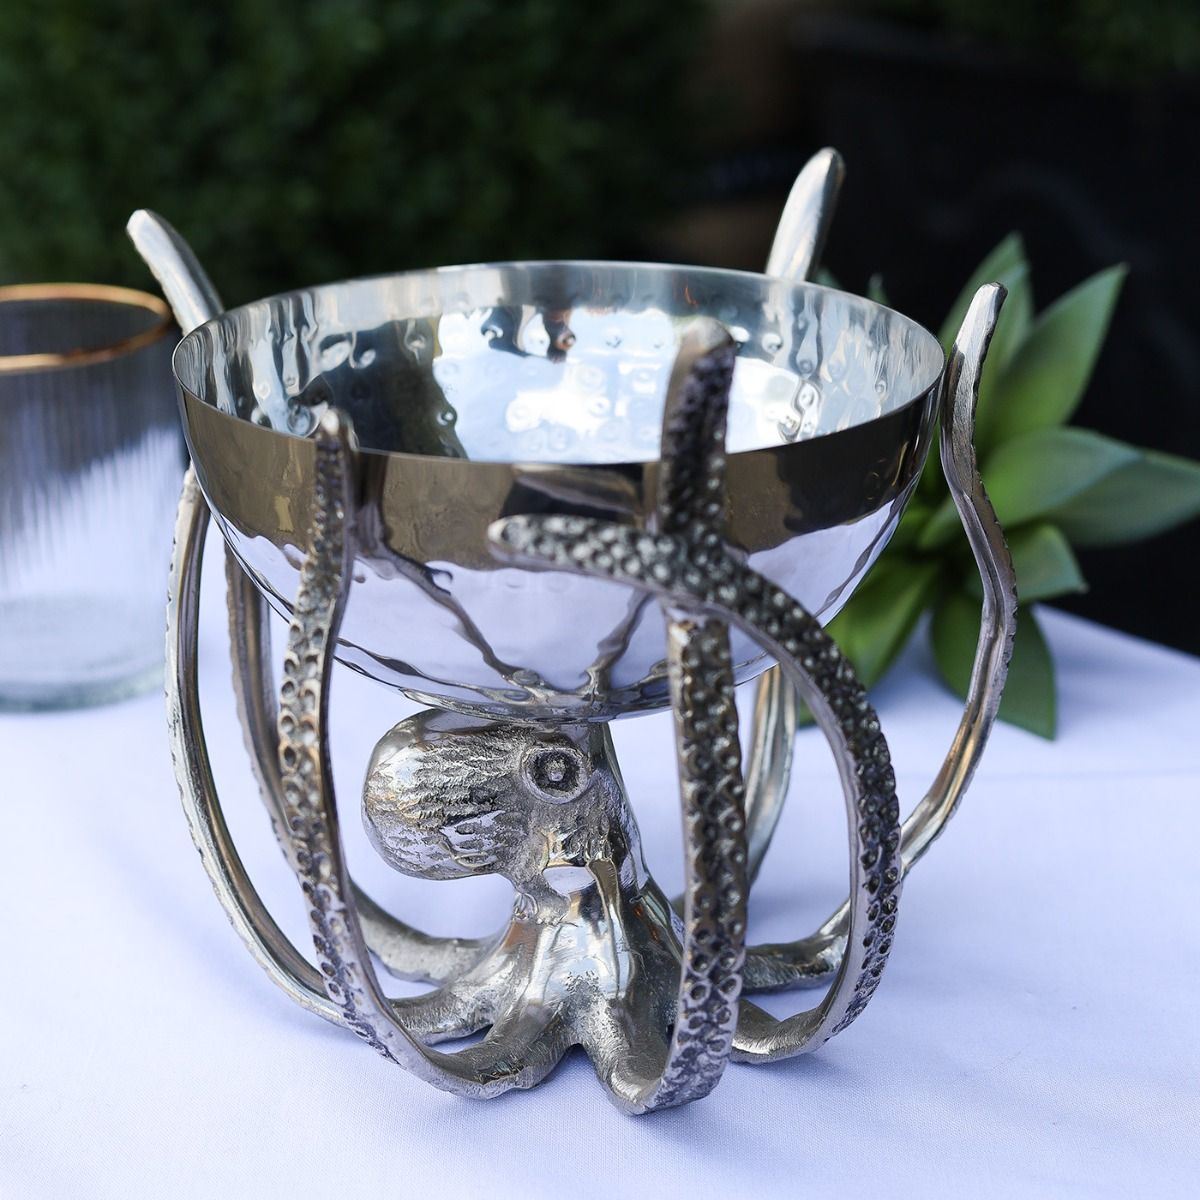 Culinary Concepts London. Mini Octopus Stand and Hammered Stainless Steel Bowl - TheArtistsQuarter